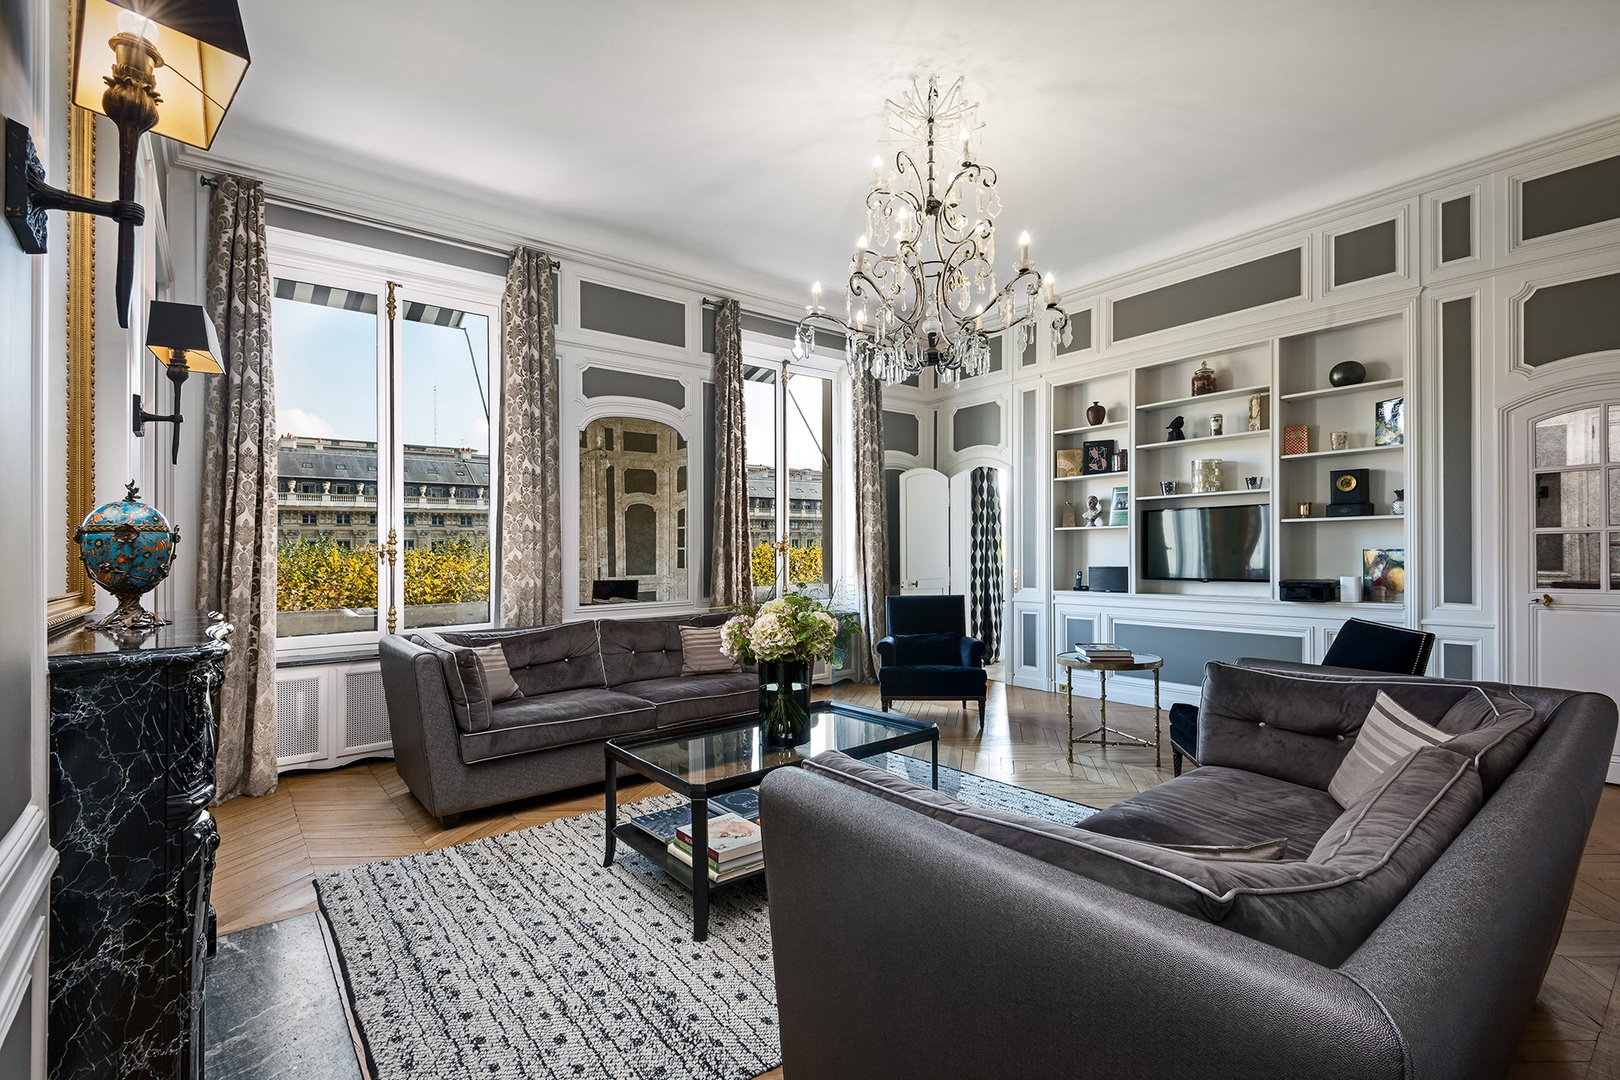 Welcome to the exquisite Chopine rental inside the iconic Palais-Royal!